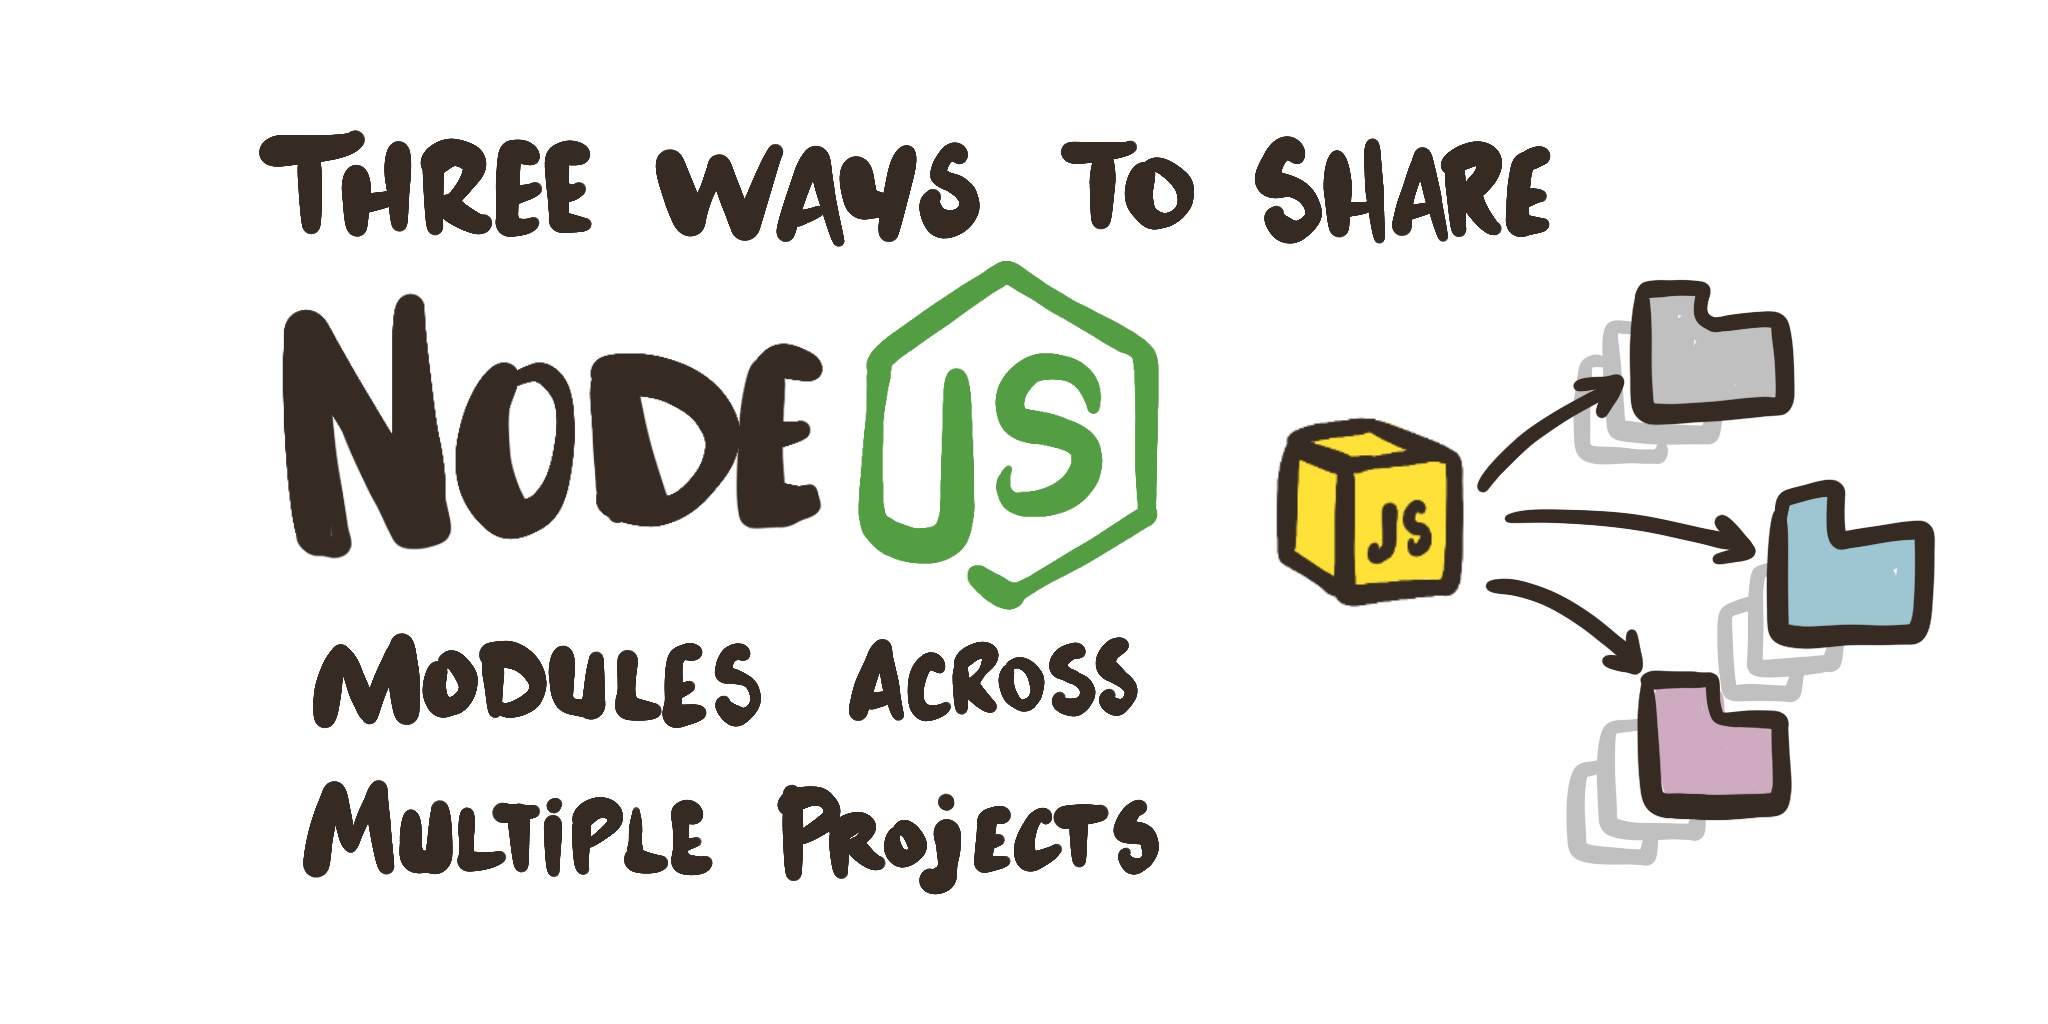 three-ways-to-share-node-js-modules-across-multiple-projects-reverentgeek